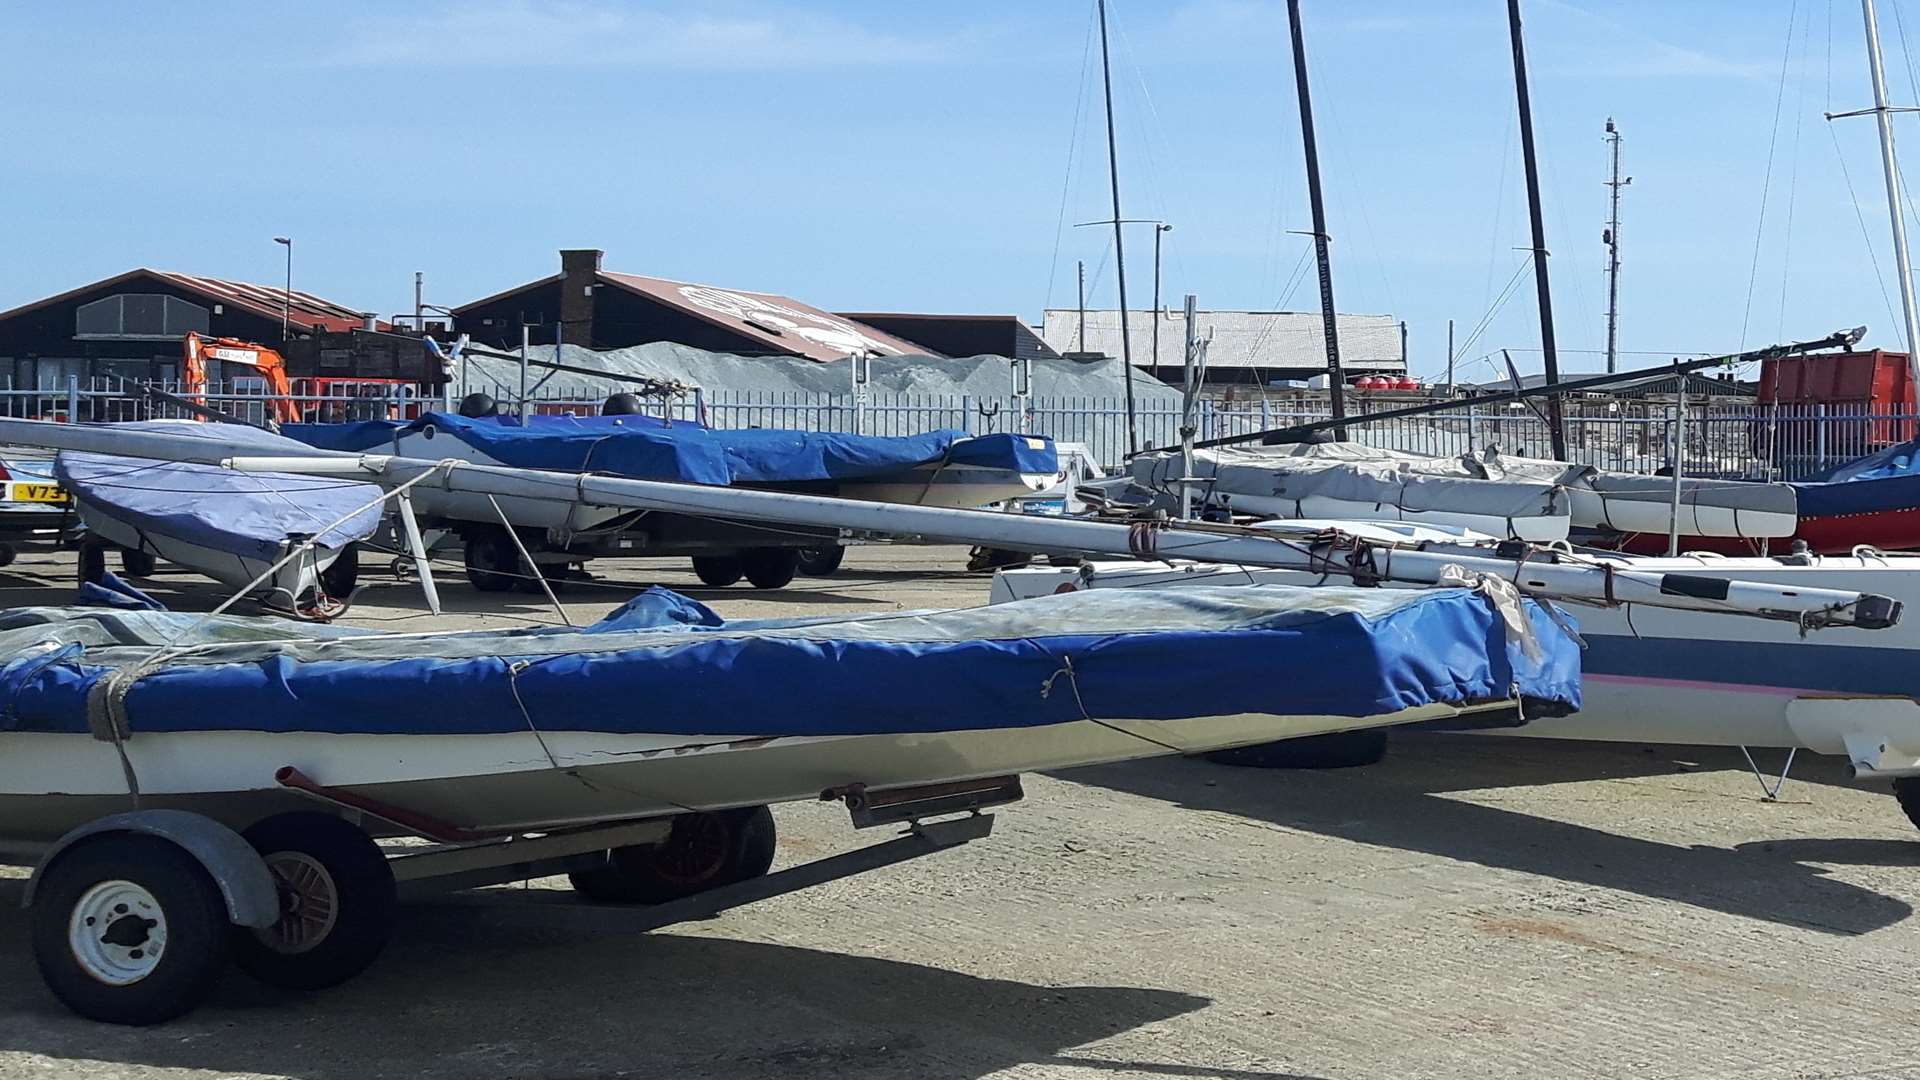 Vandals have damaged boats that can cost up to £30,000.